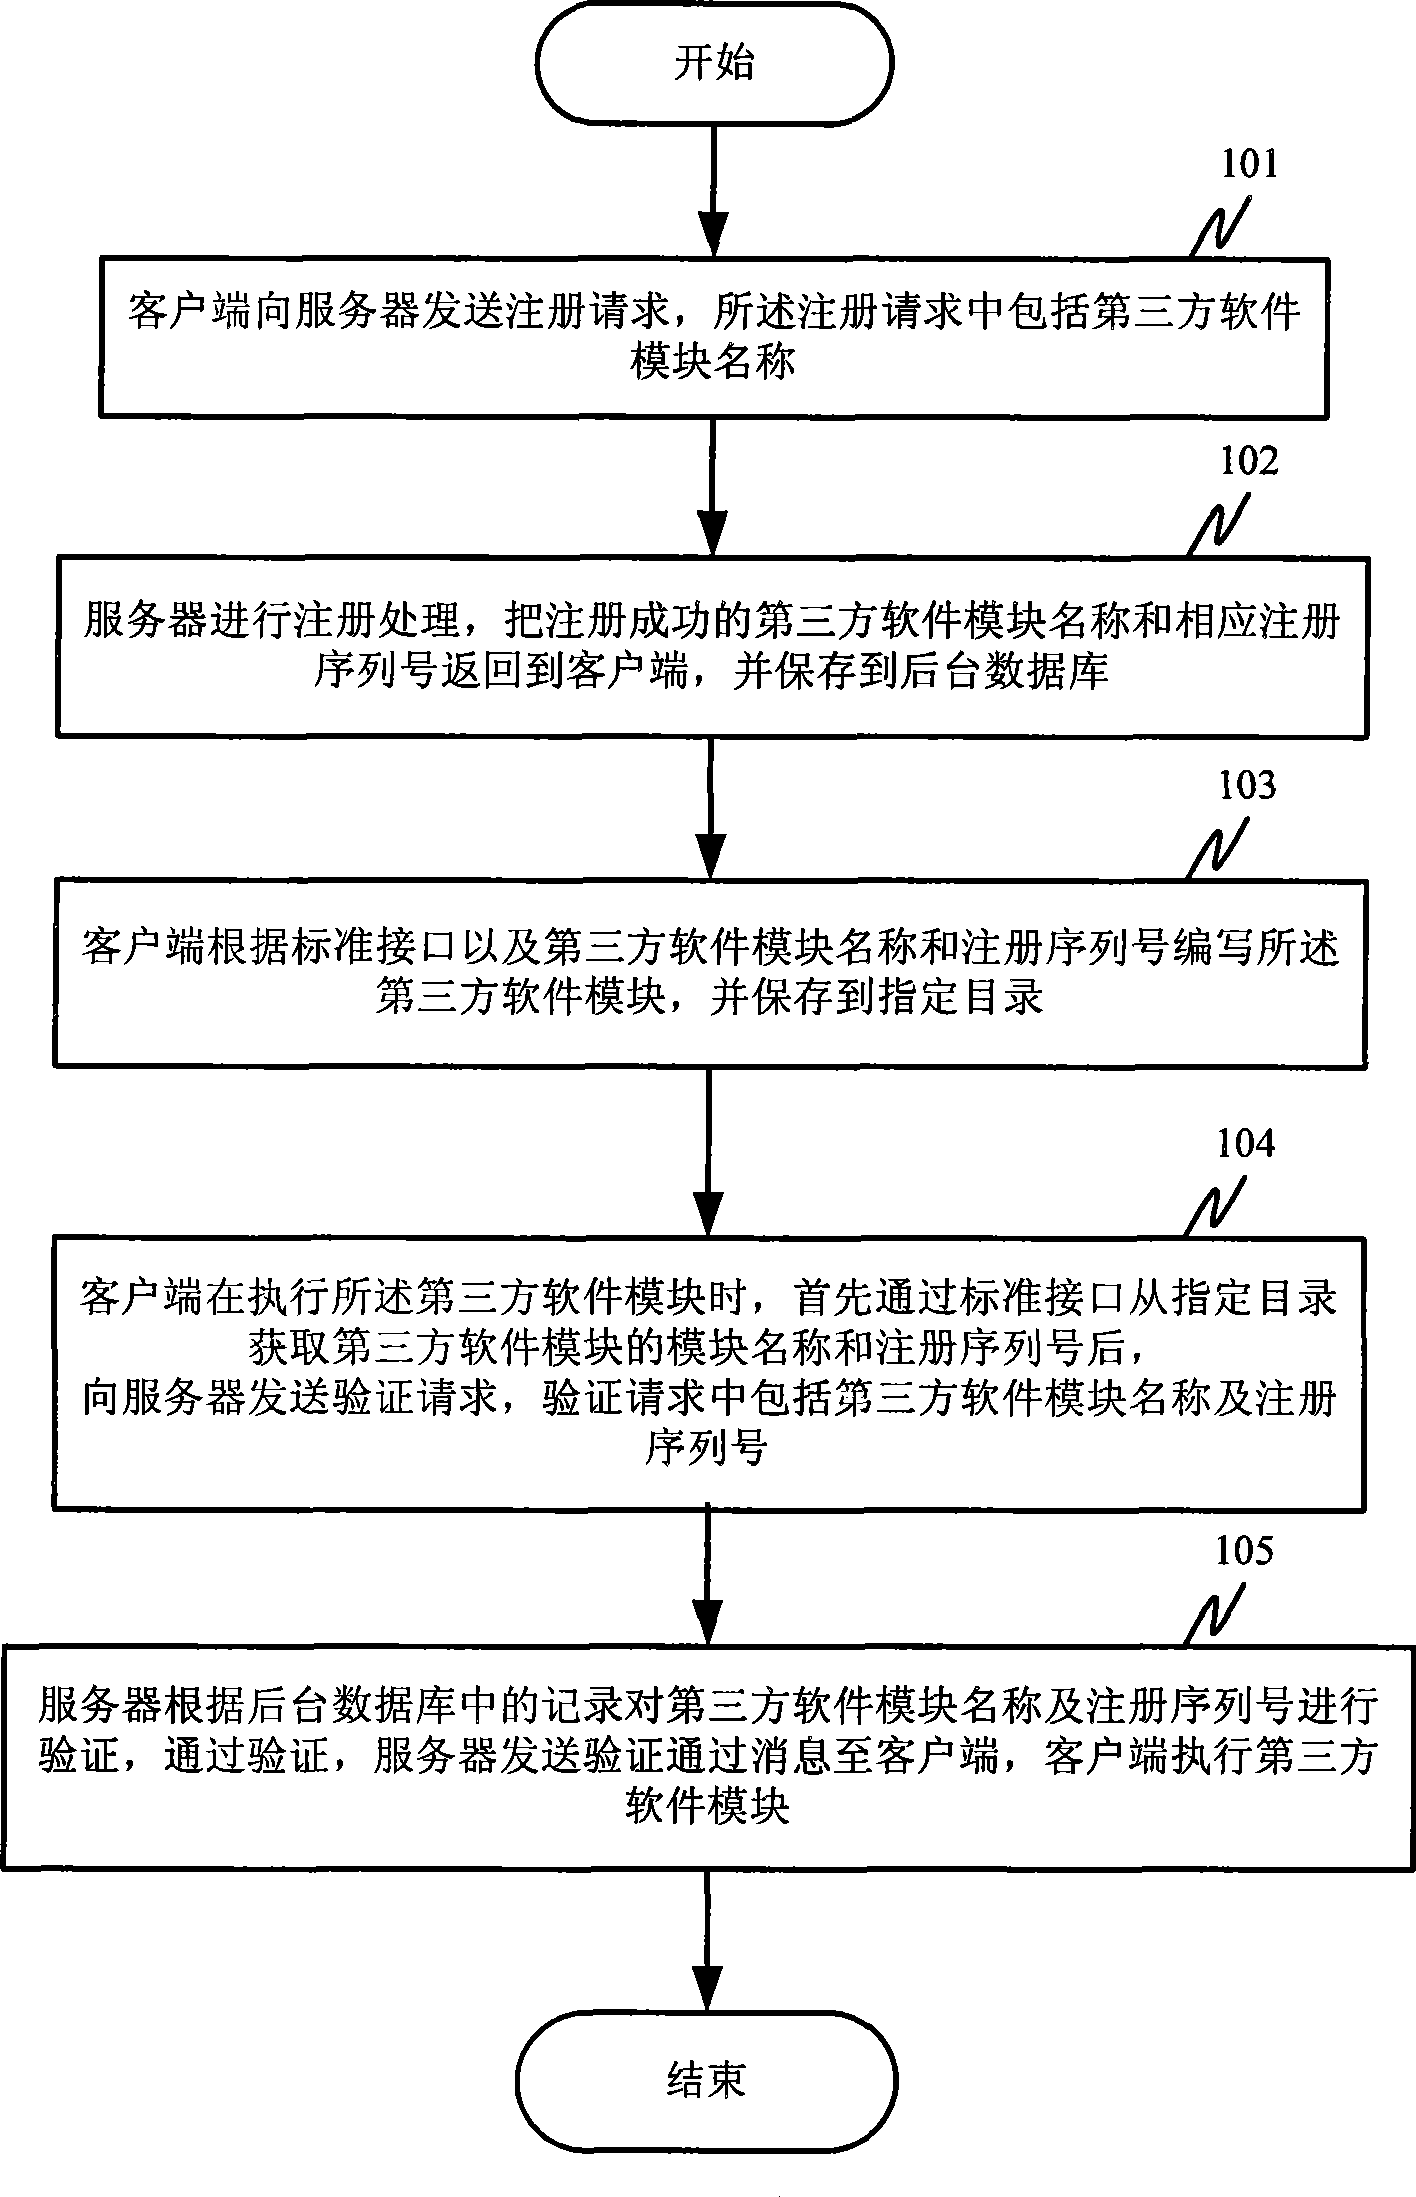 Method and system for loading third-party software